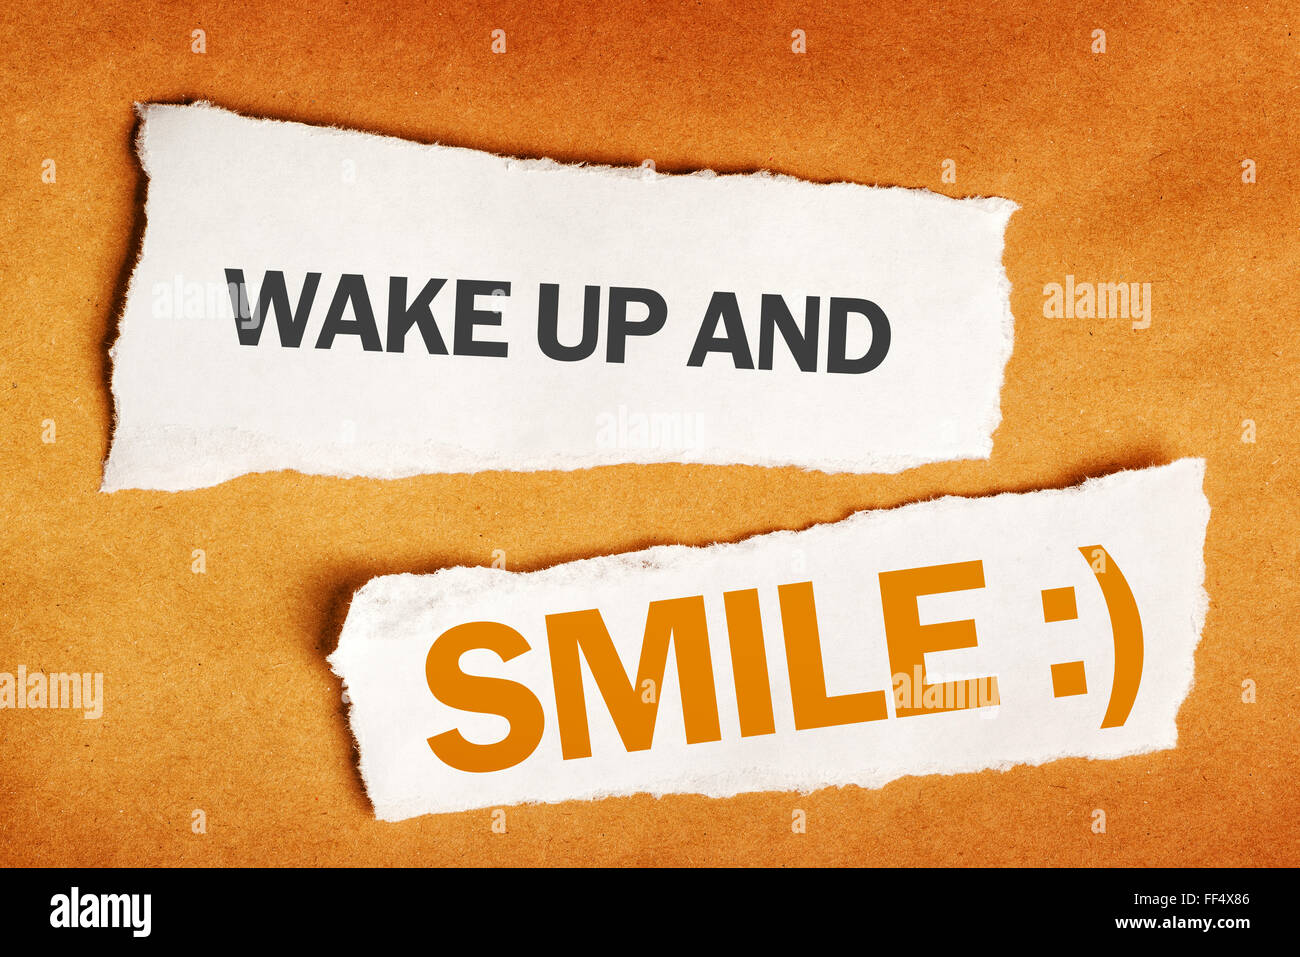 Wake up and smile motivational message on scrap paper Stock Photo